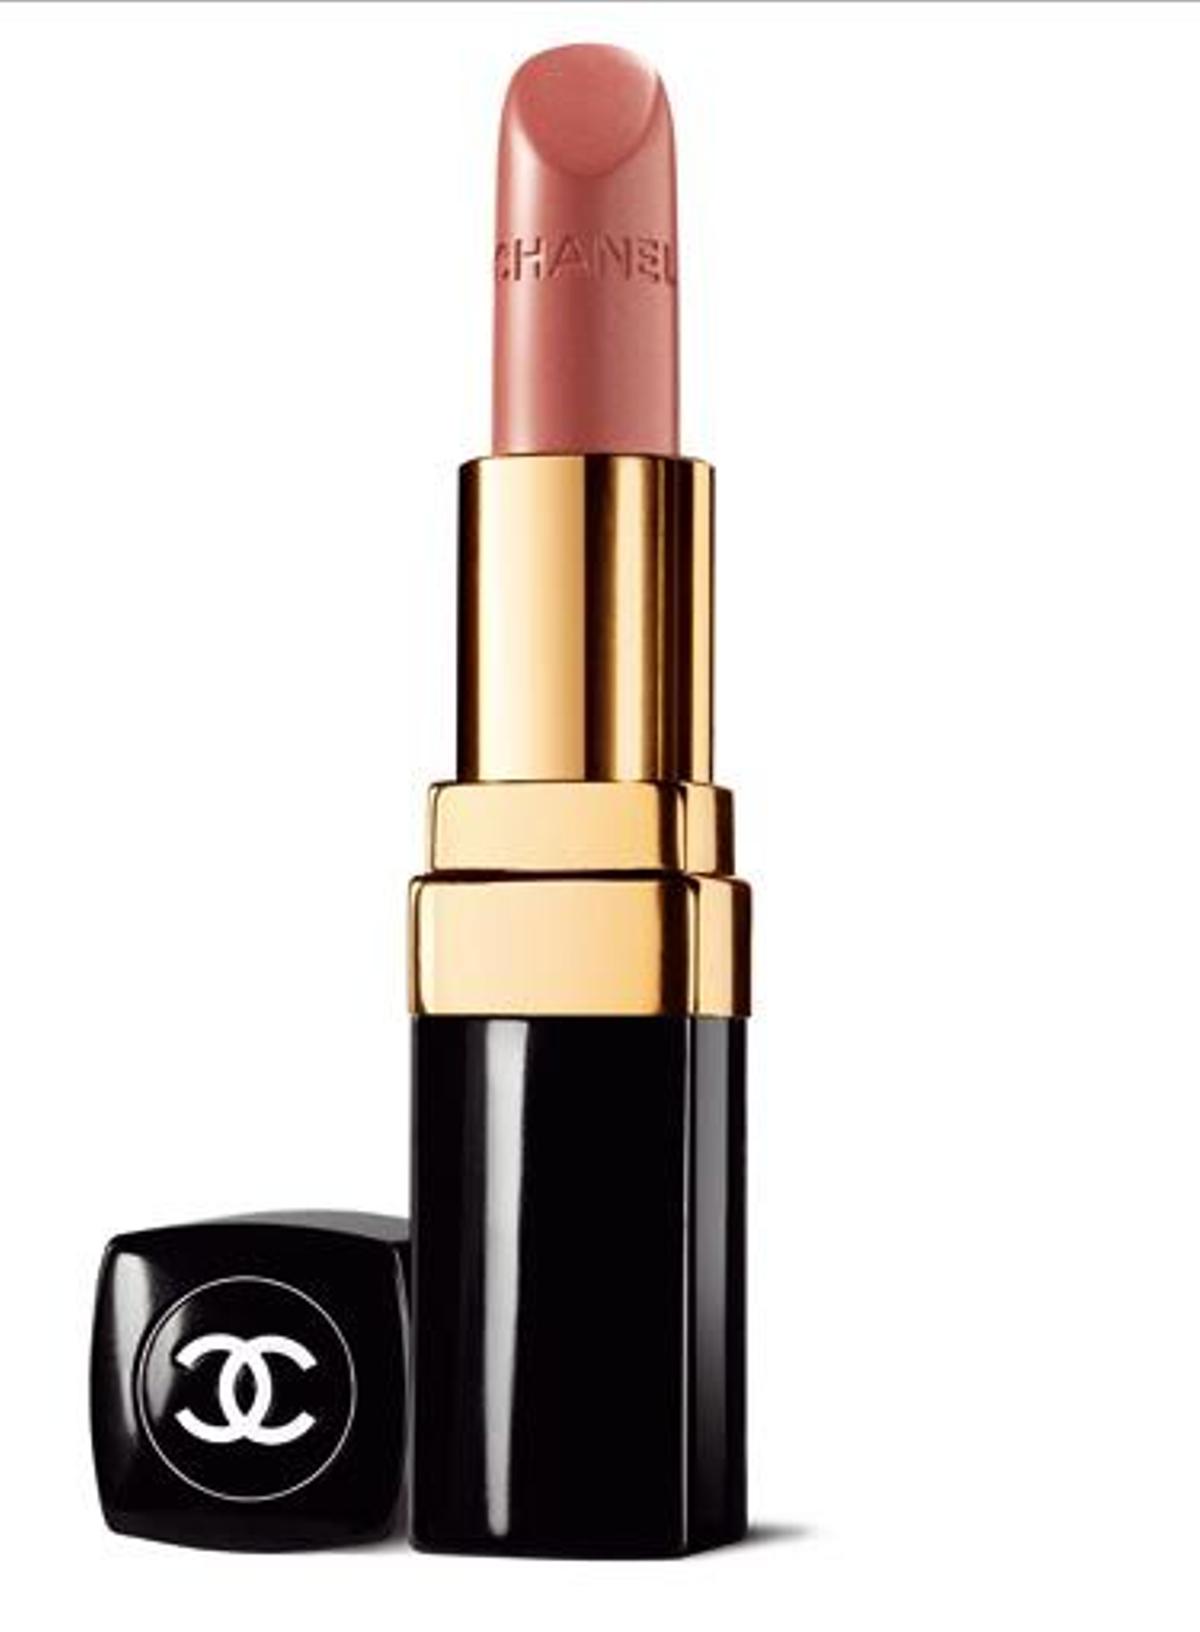 Rouge Coco chanel